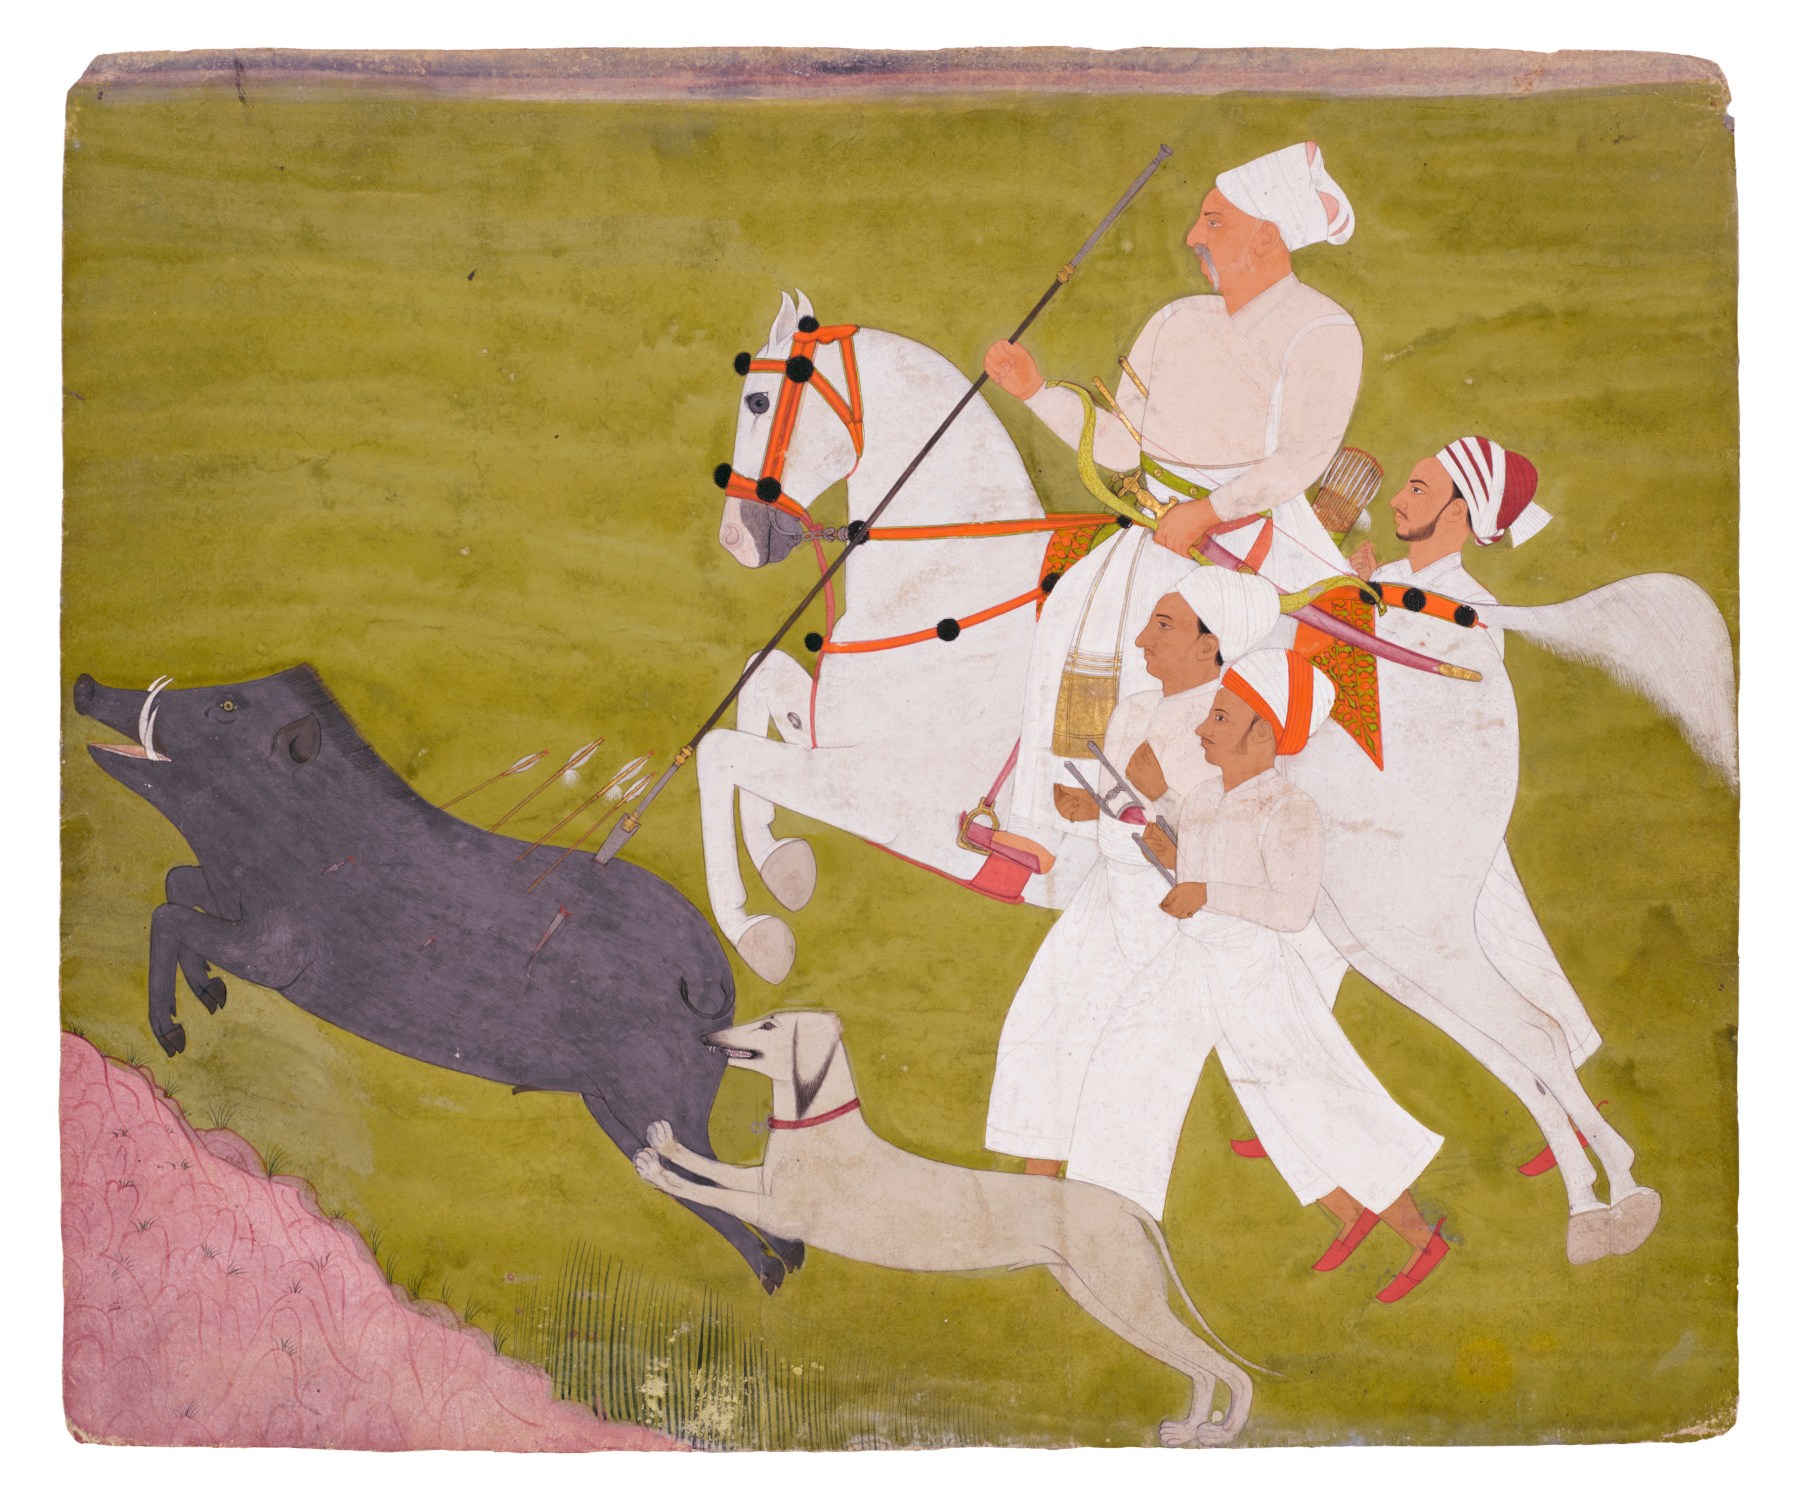 Abhai Karan is on a rearing horse as he calmly pushes his spear into the boar’s back